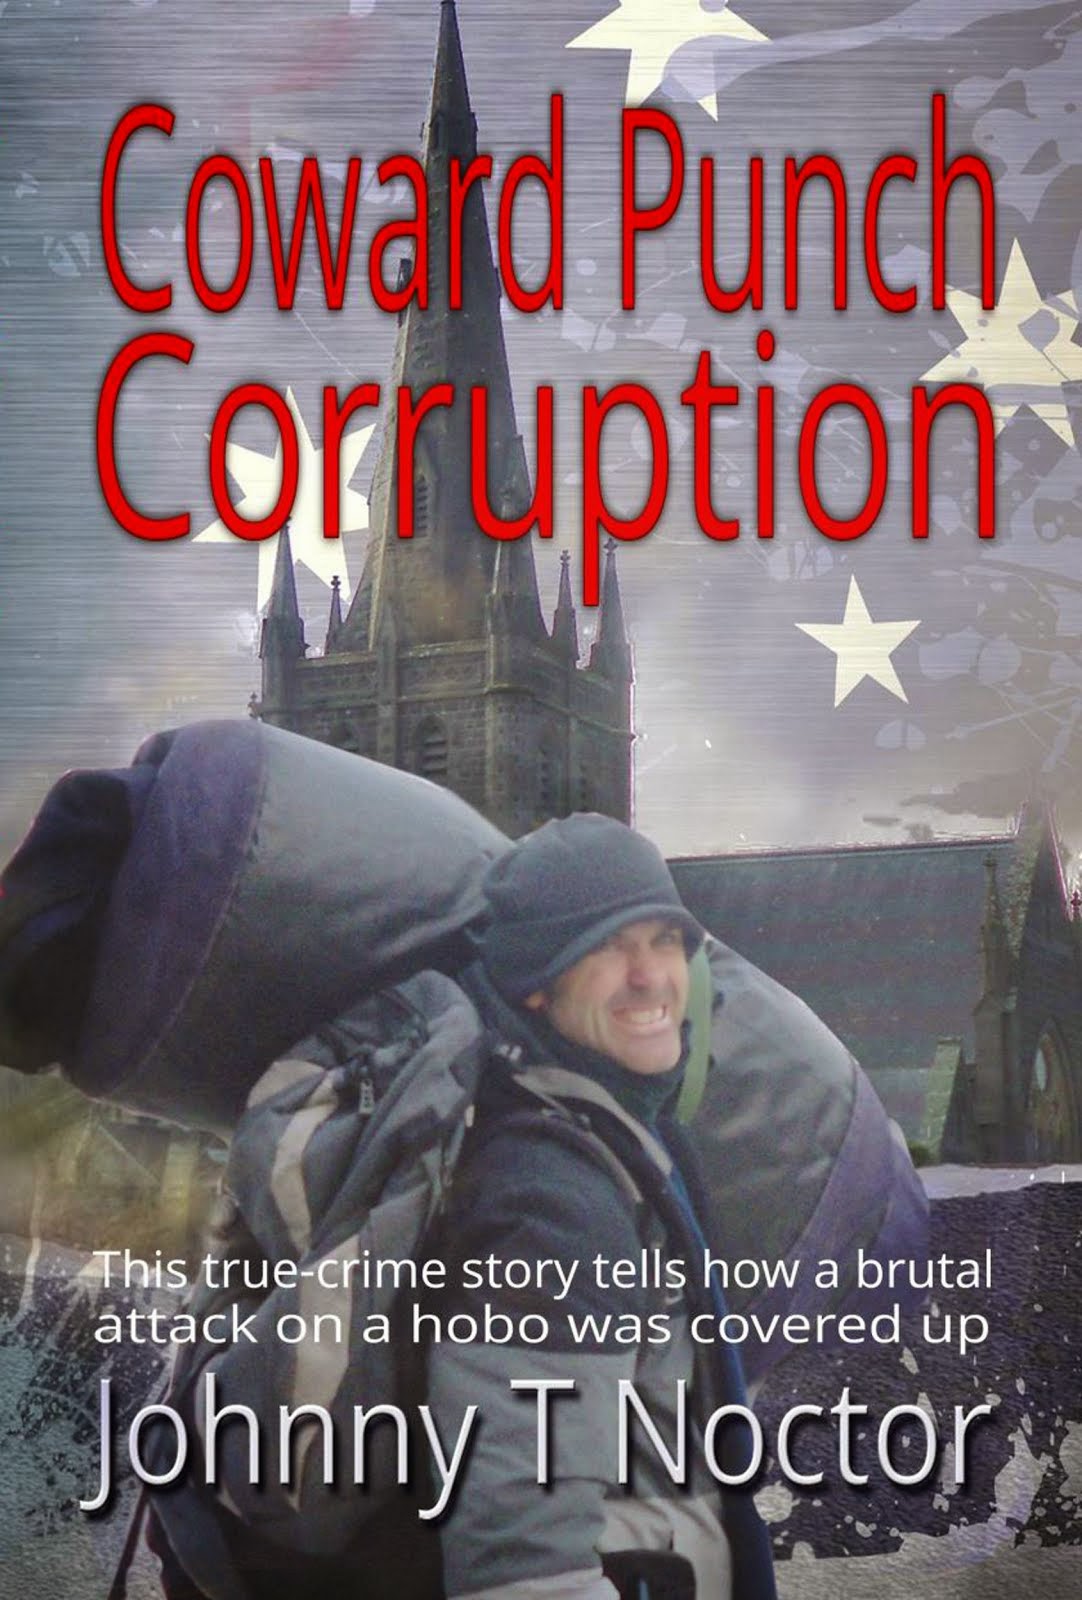 Coward Punch Corruption (The Hobo Chronicles) Book 3: eBook & Paperback on Amazon: